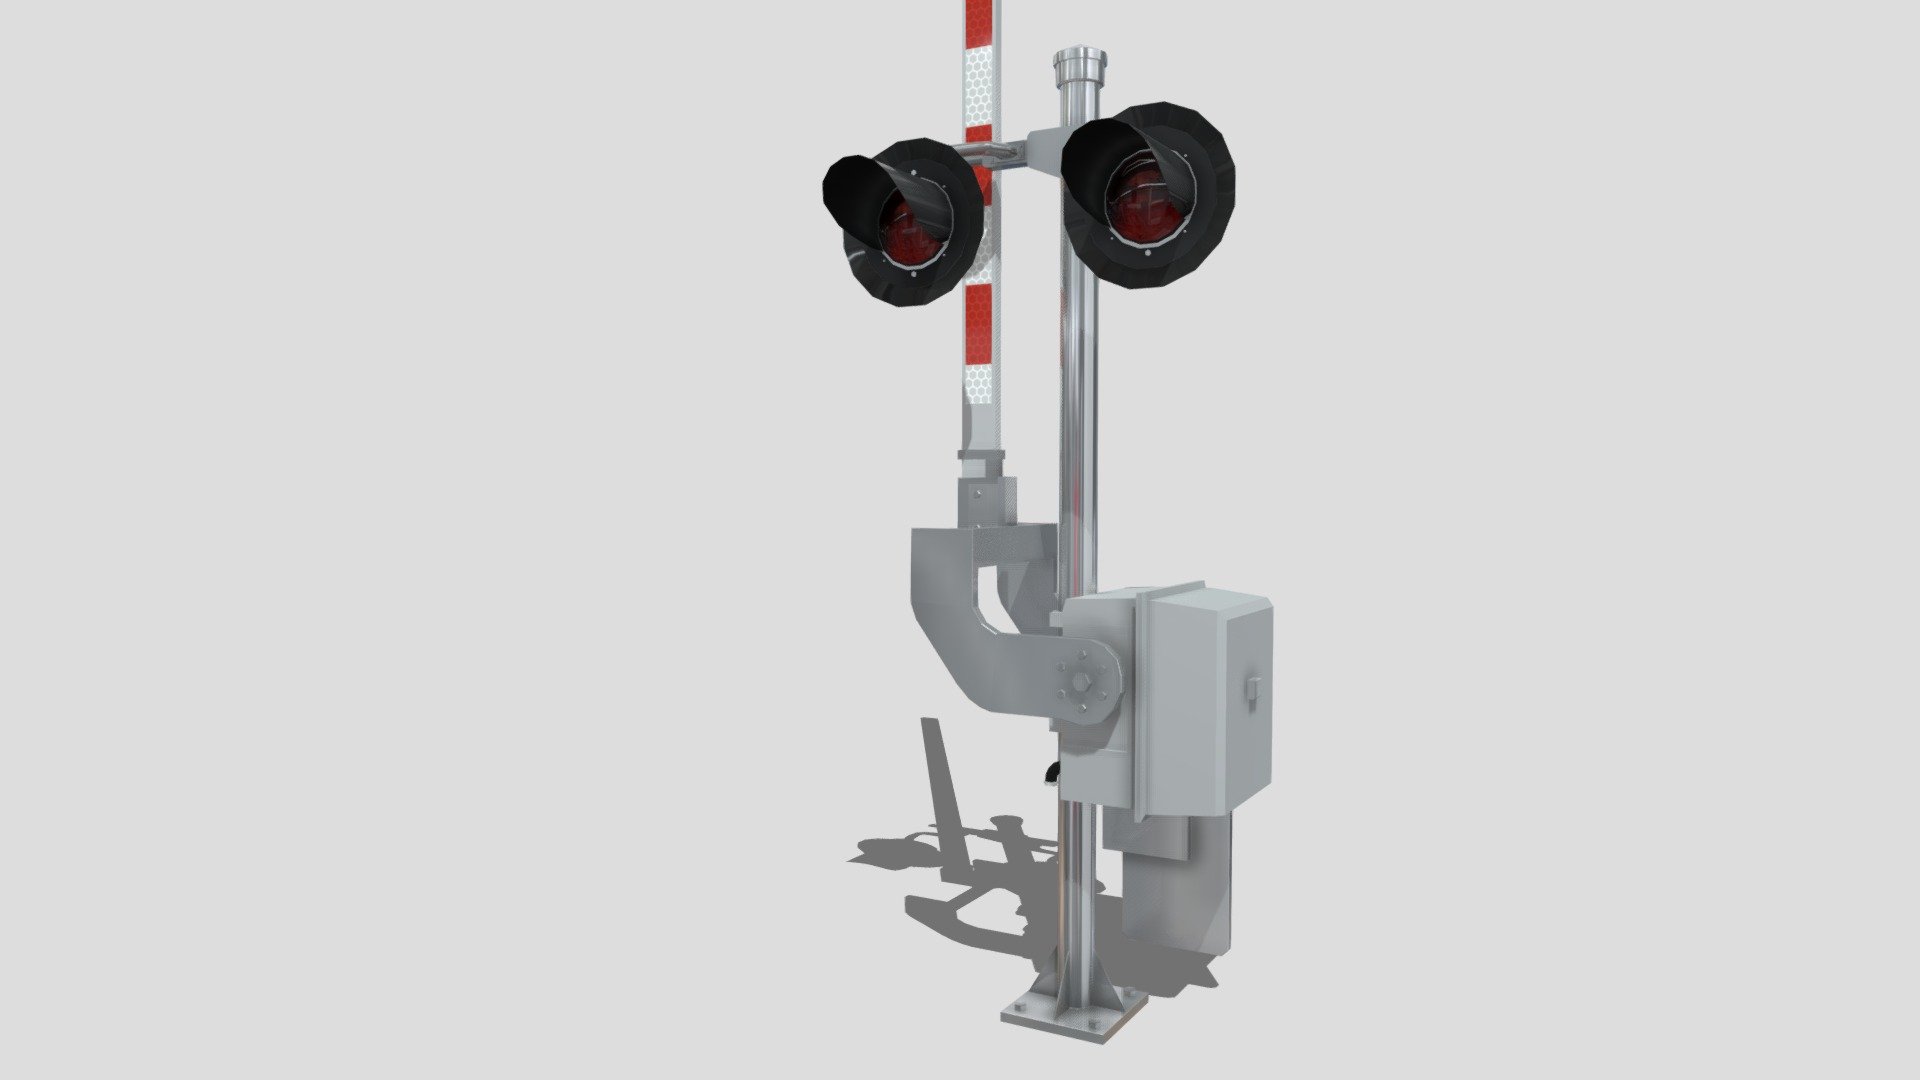 Modern LED Western Cullen Hayes Railroad Crossing signals with no crossbuck 3d model